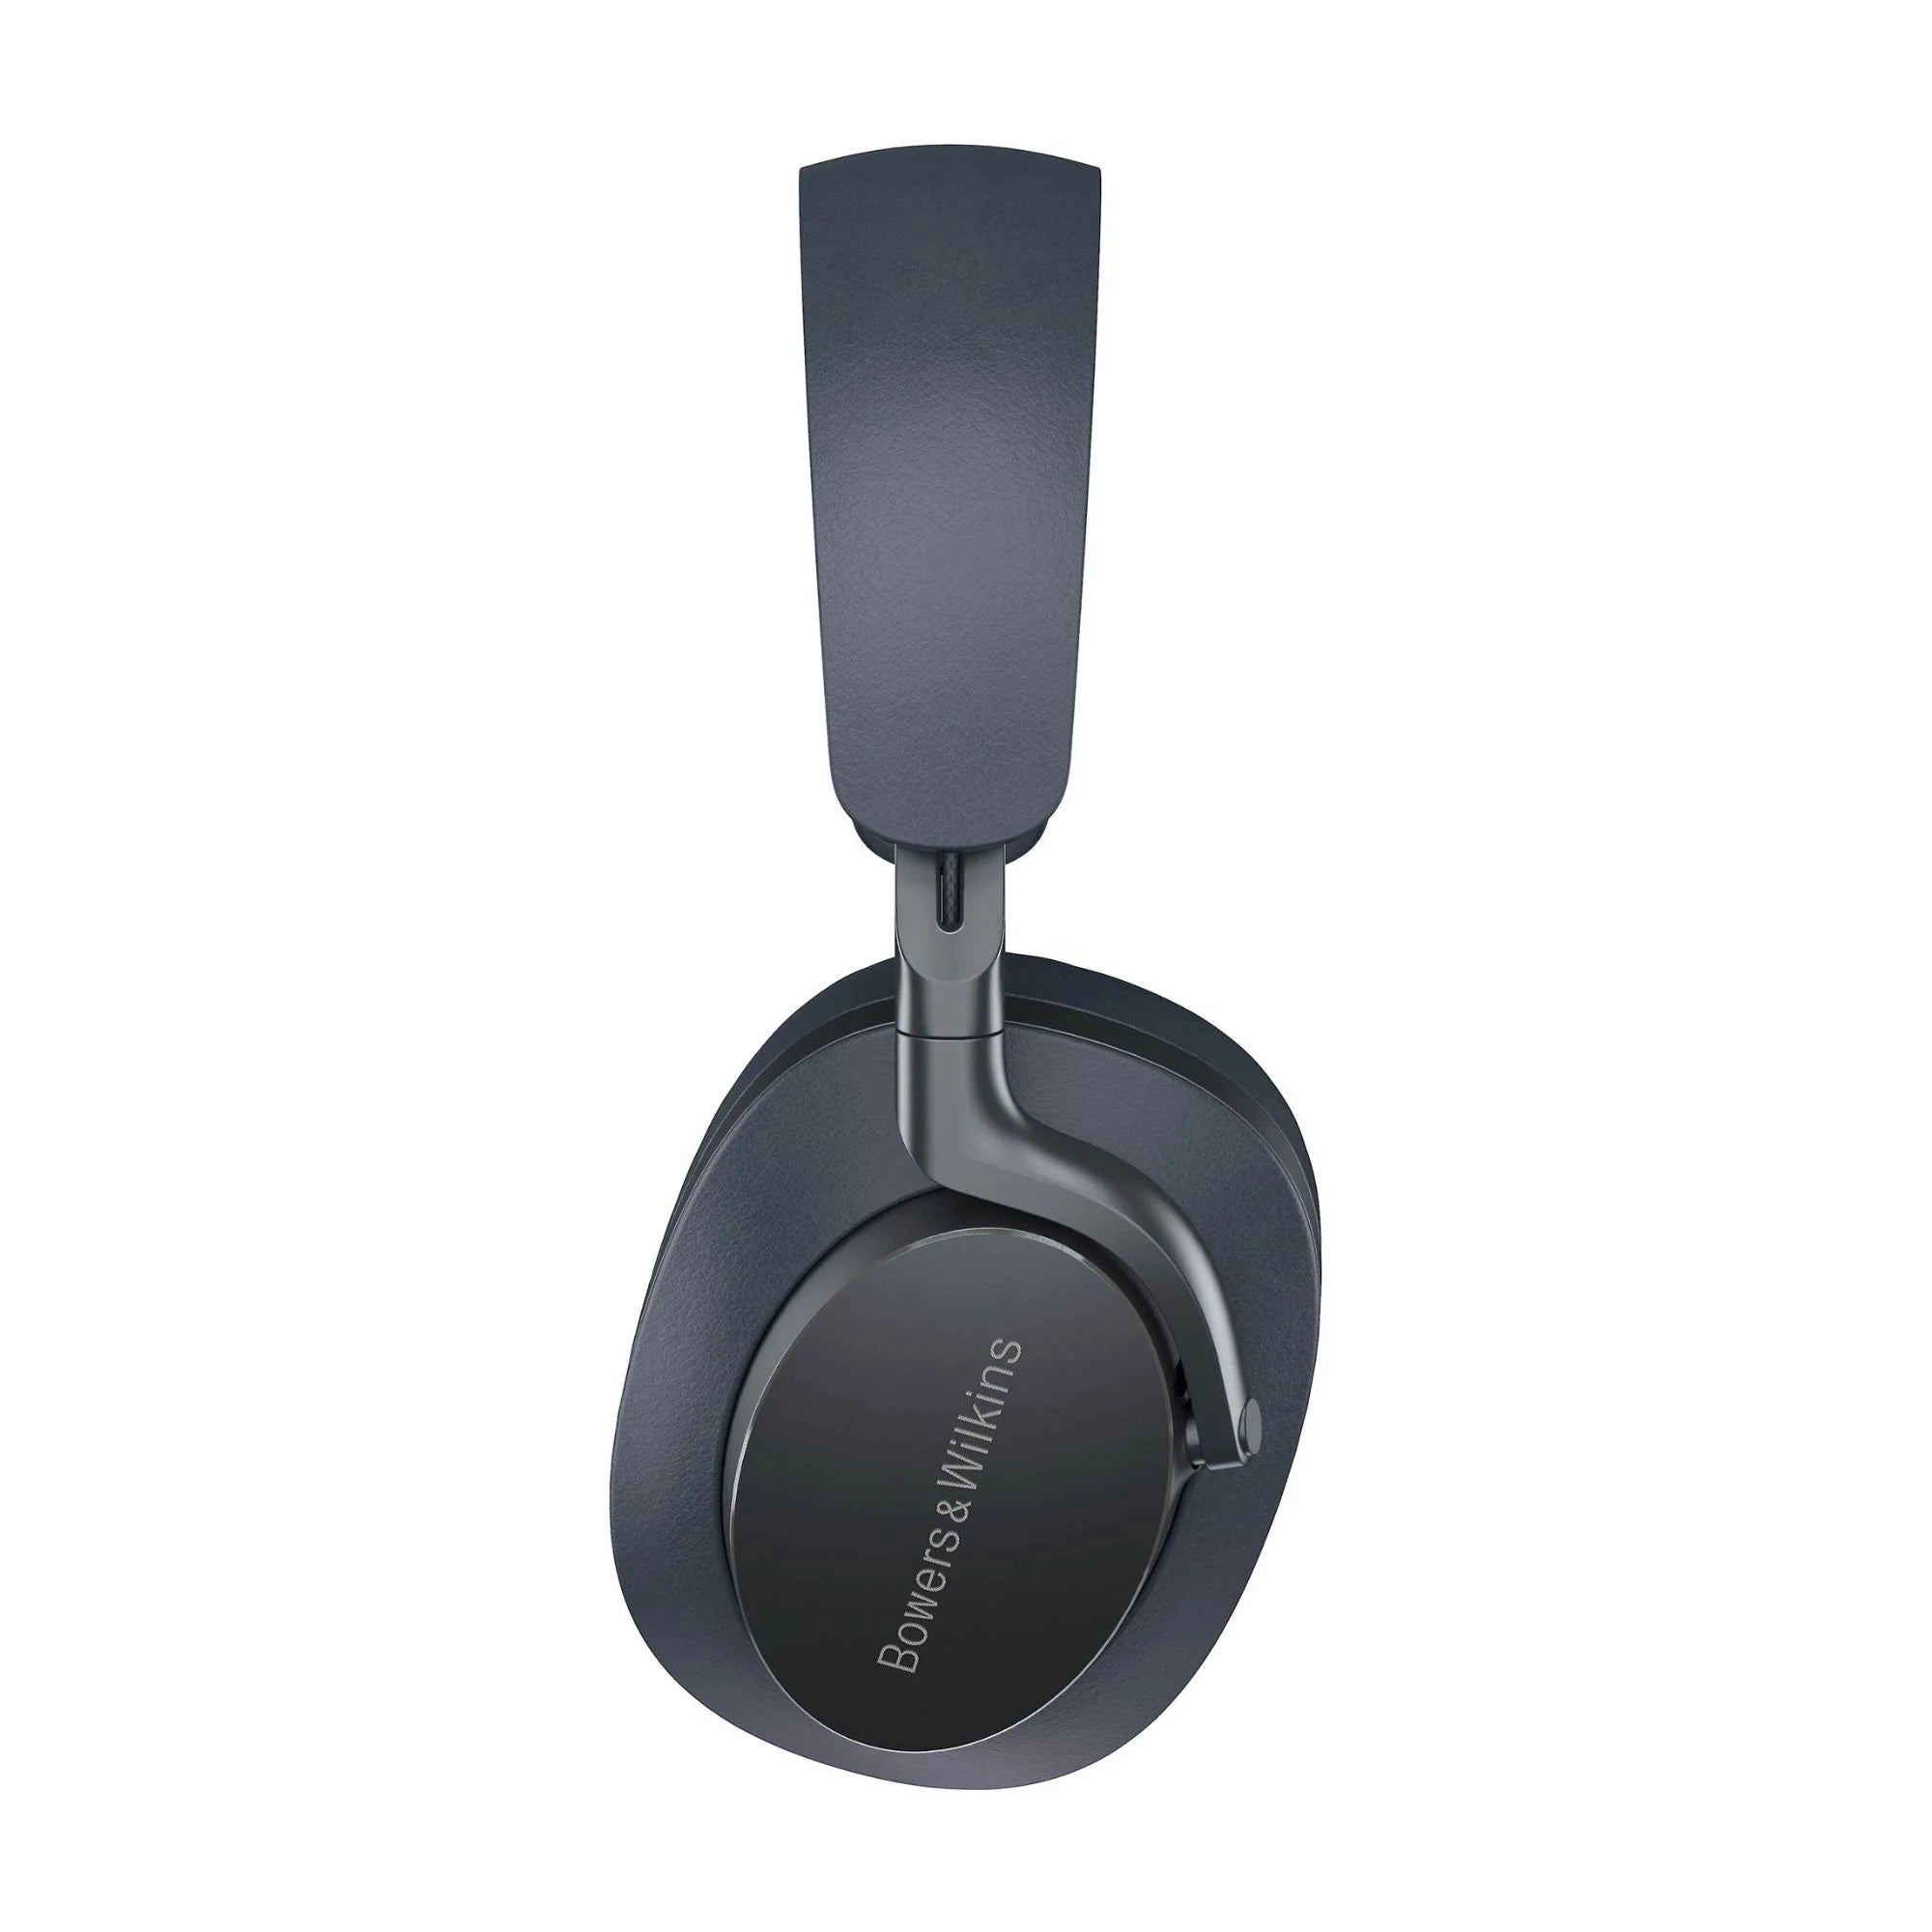 Bowers & Wilkins PX8 Noise-Cancelling Wireless Headphones